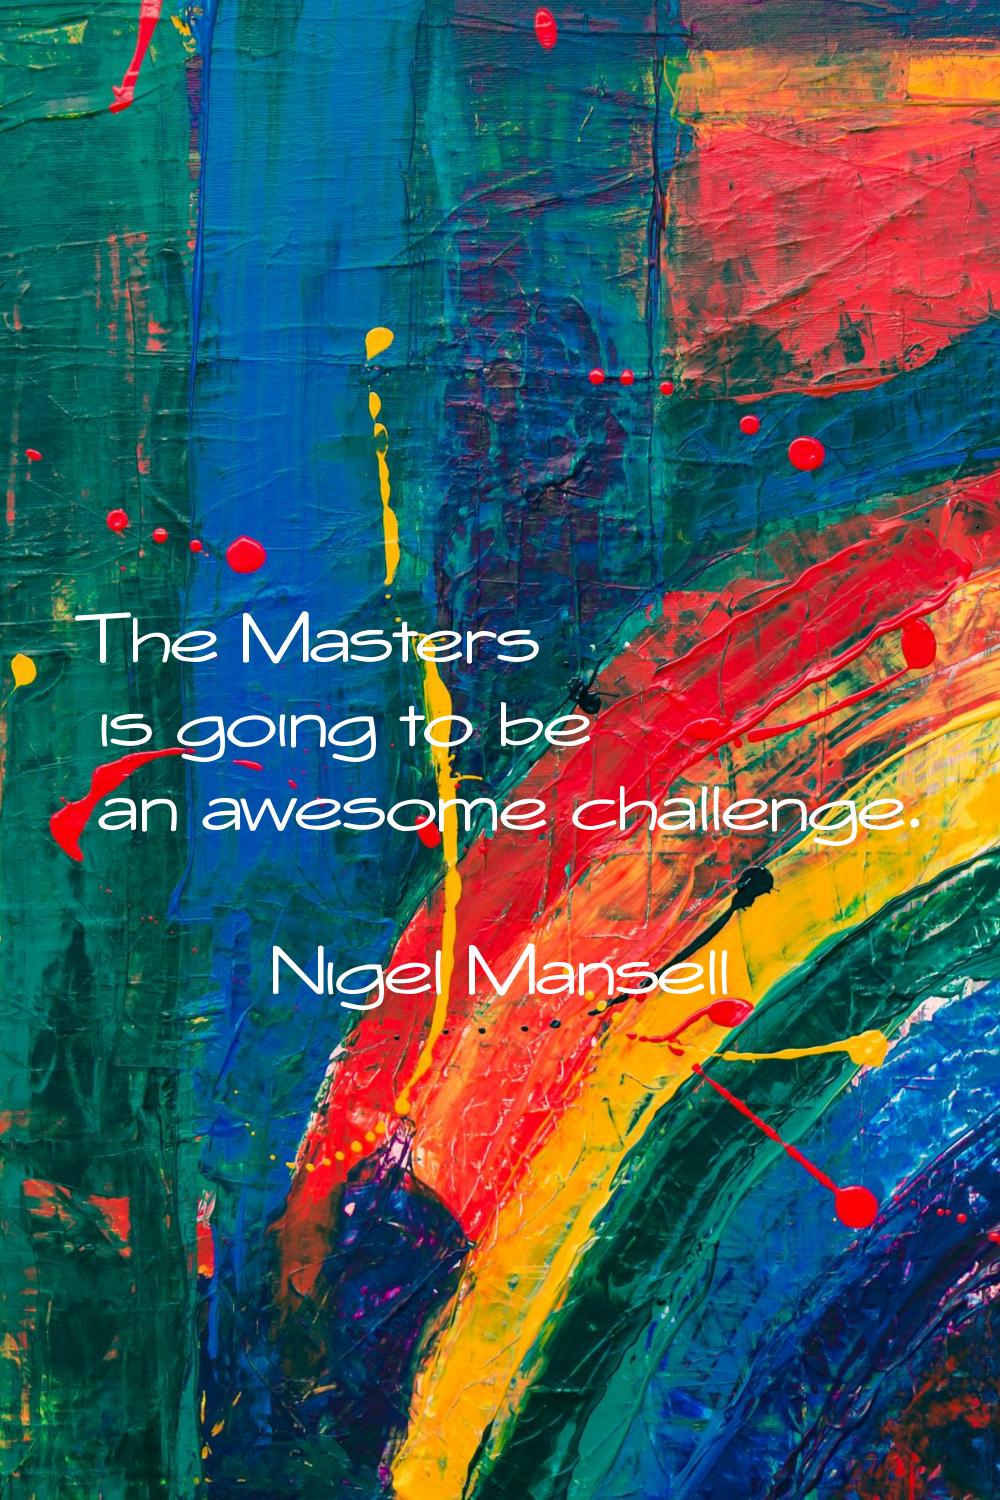 The Masters is going to be an awesome challenge.